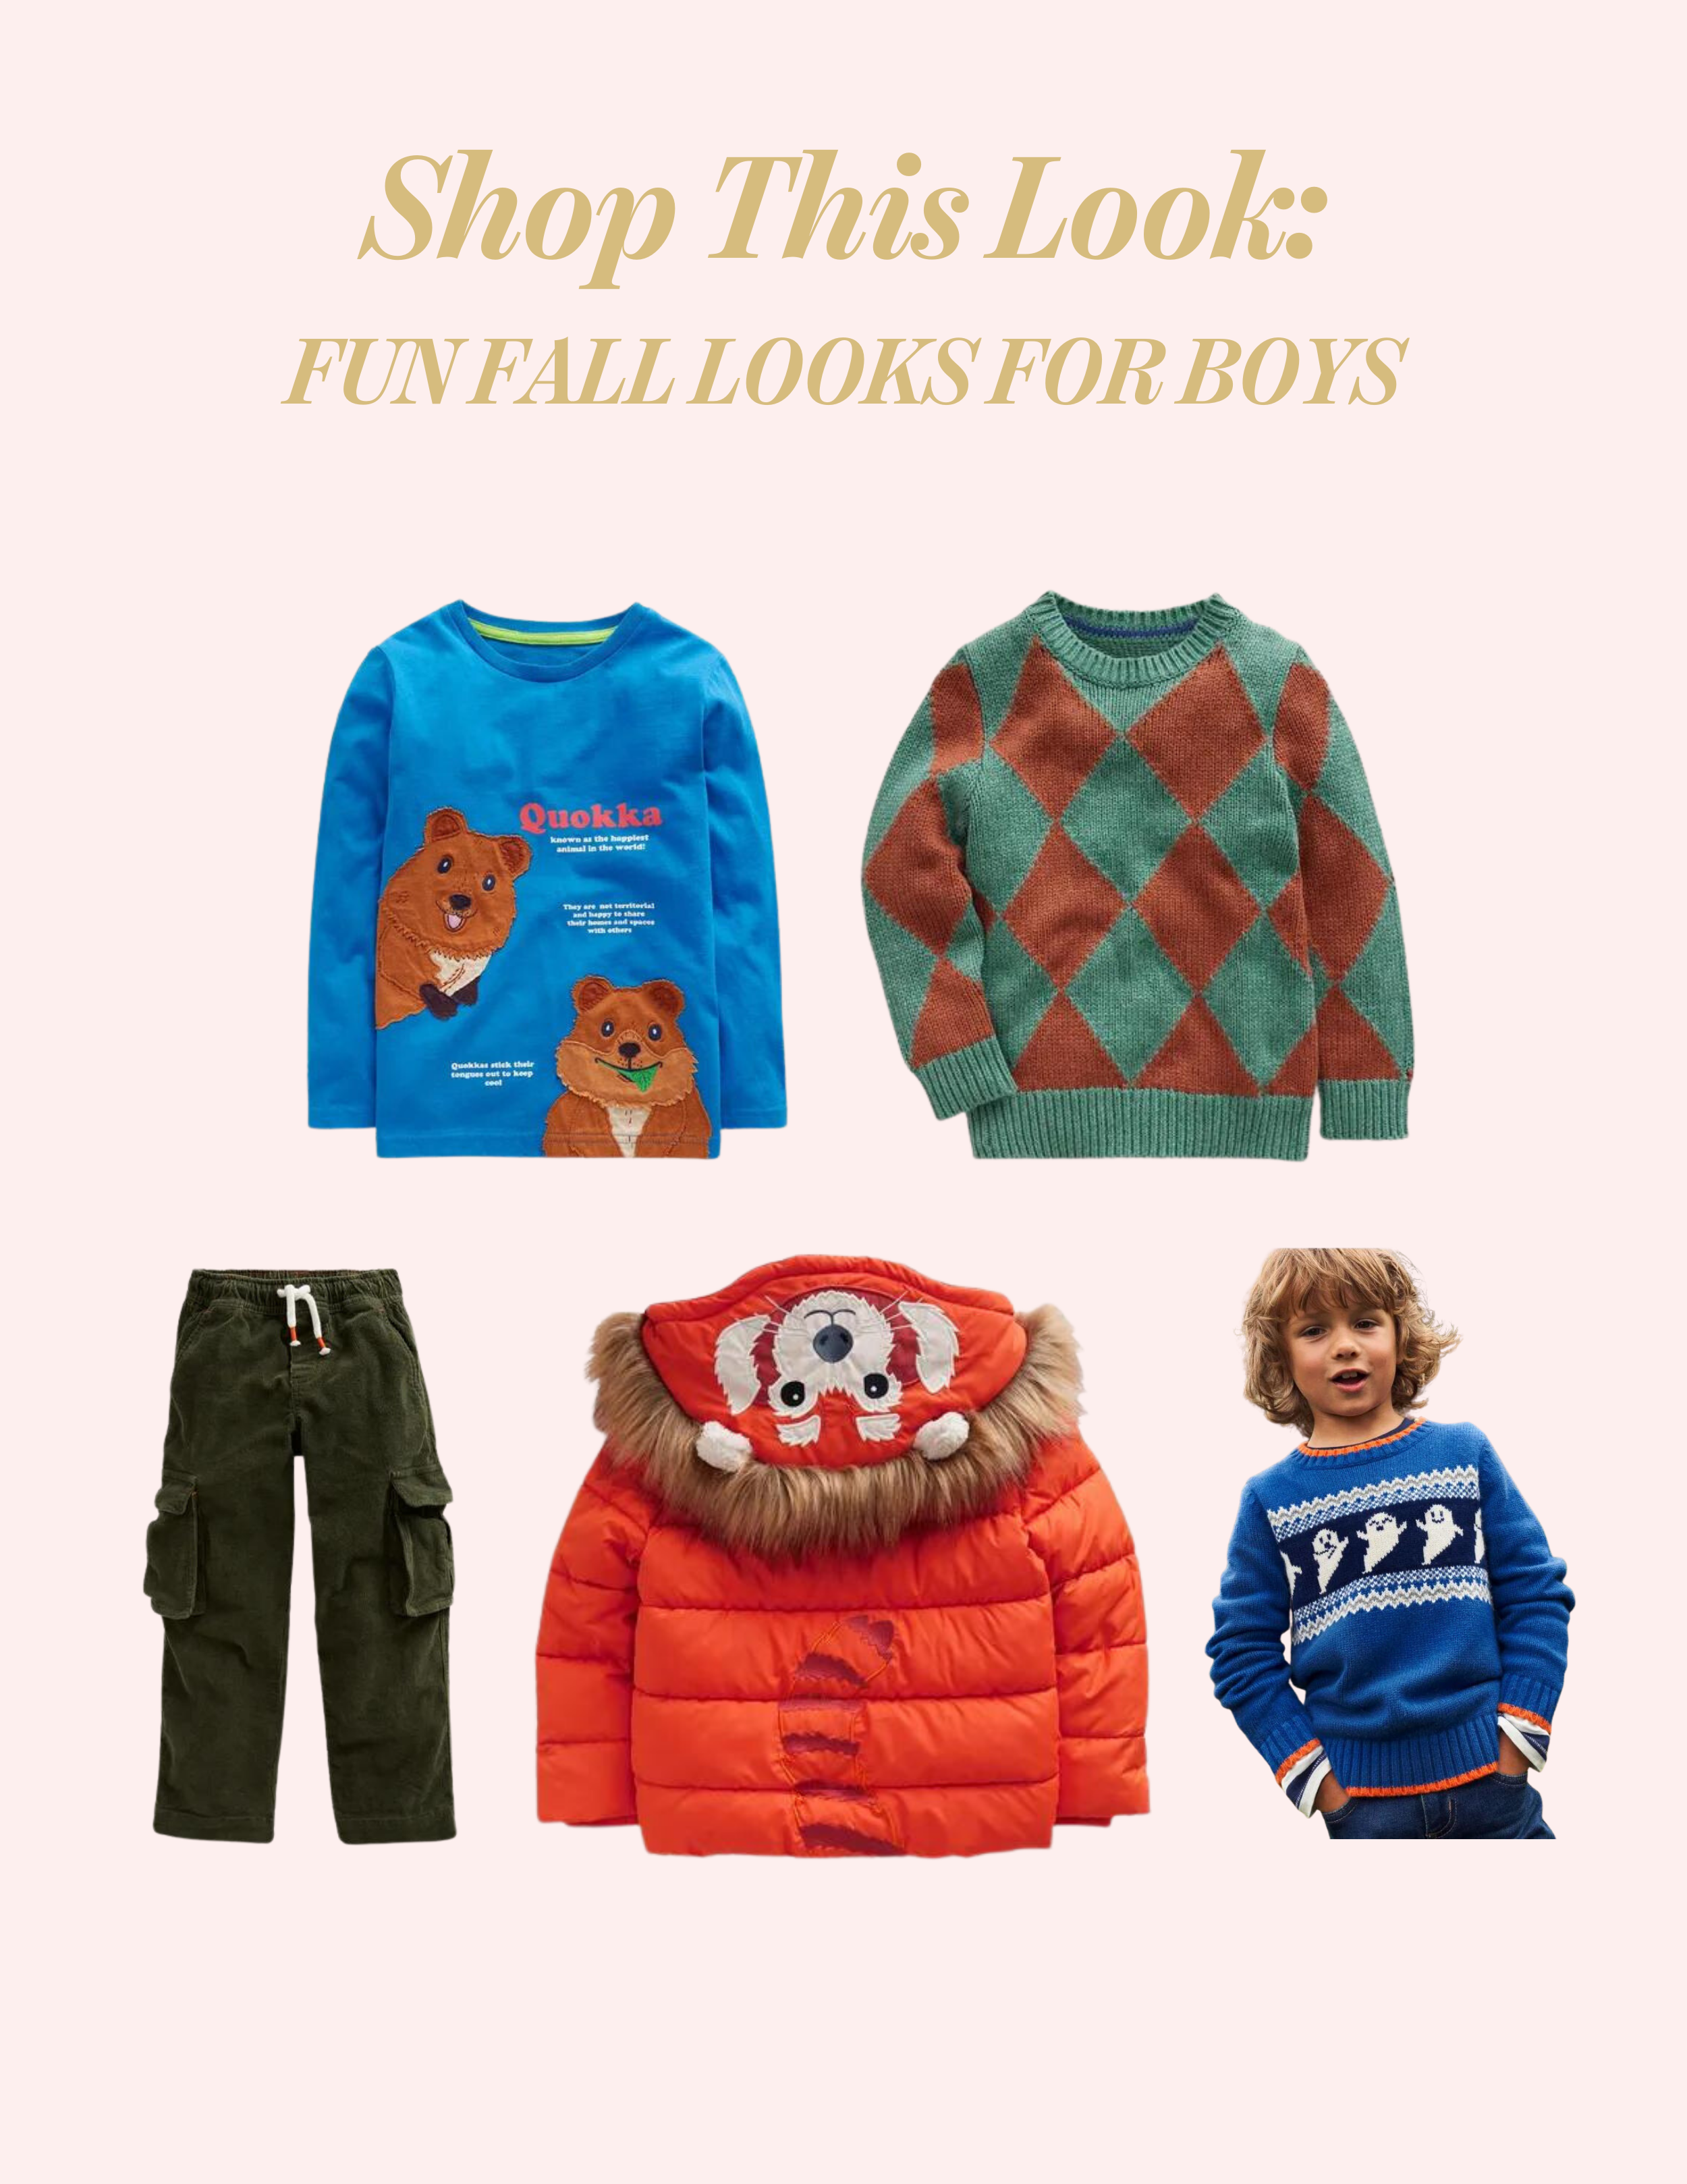 Shop This Look Fun Fall Looks for Boys.png